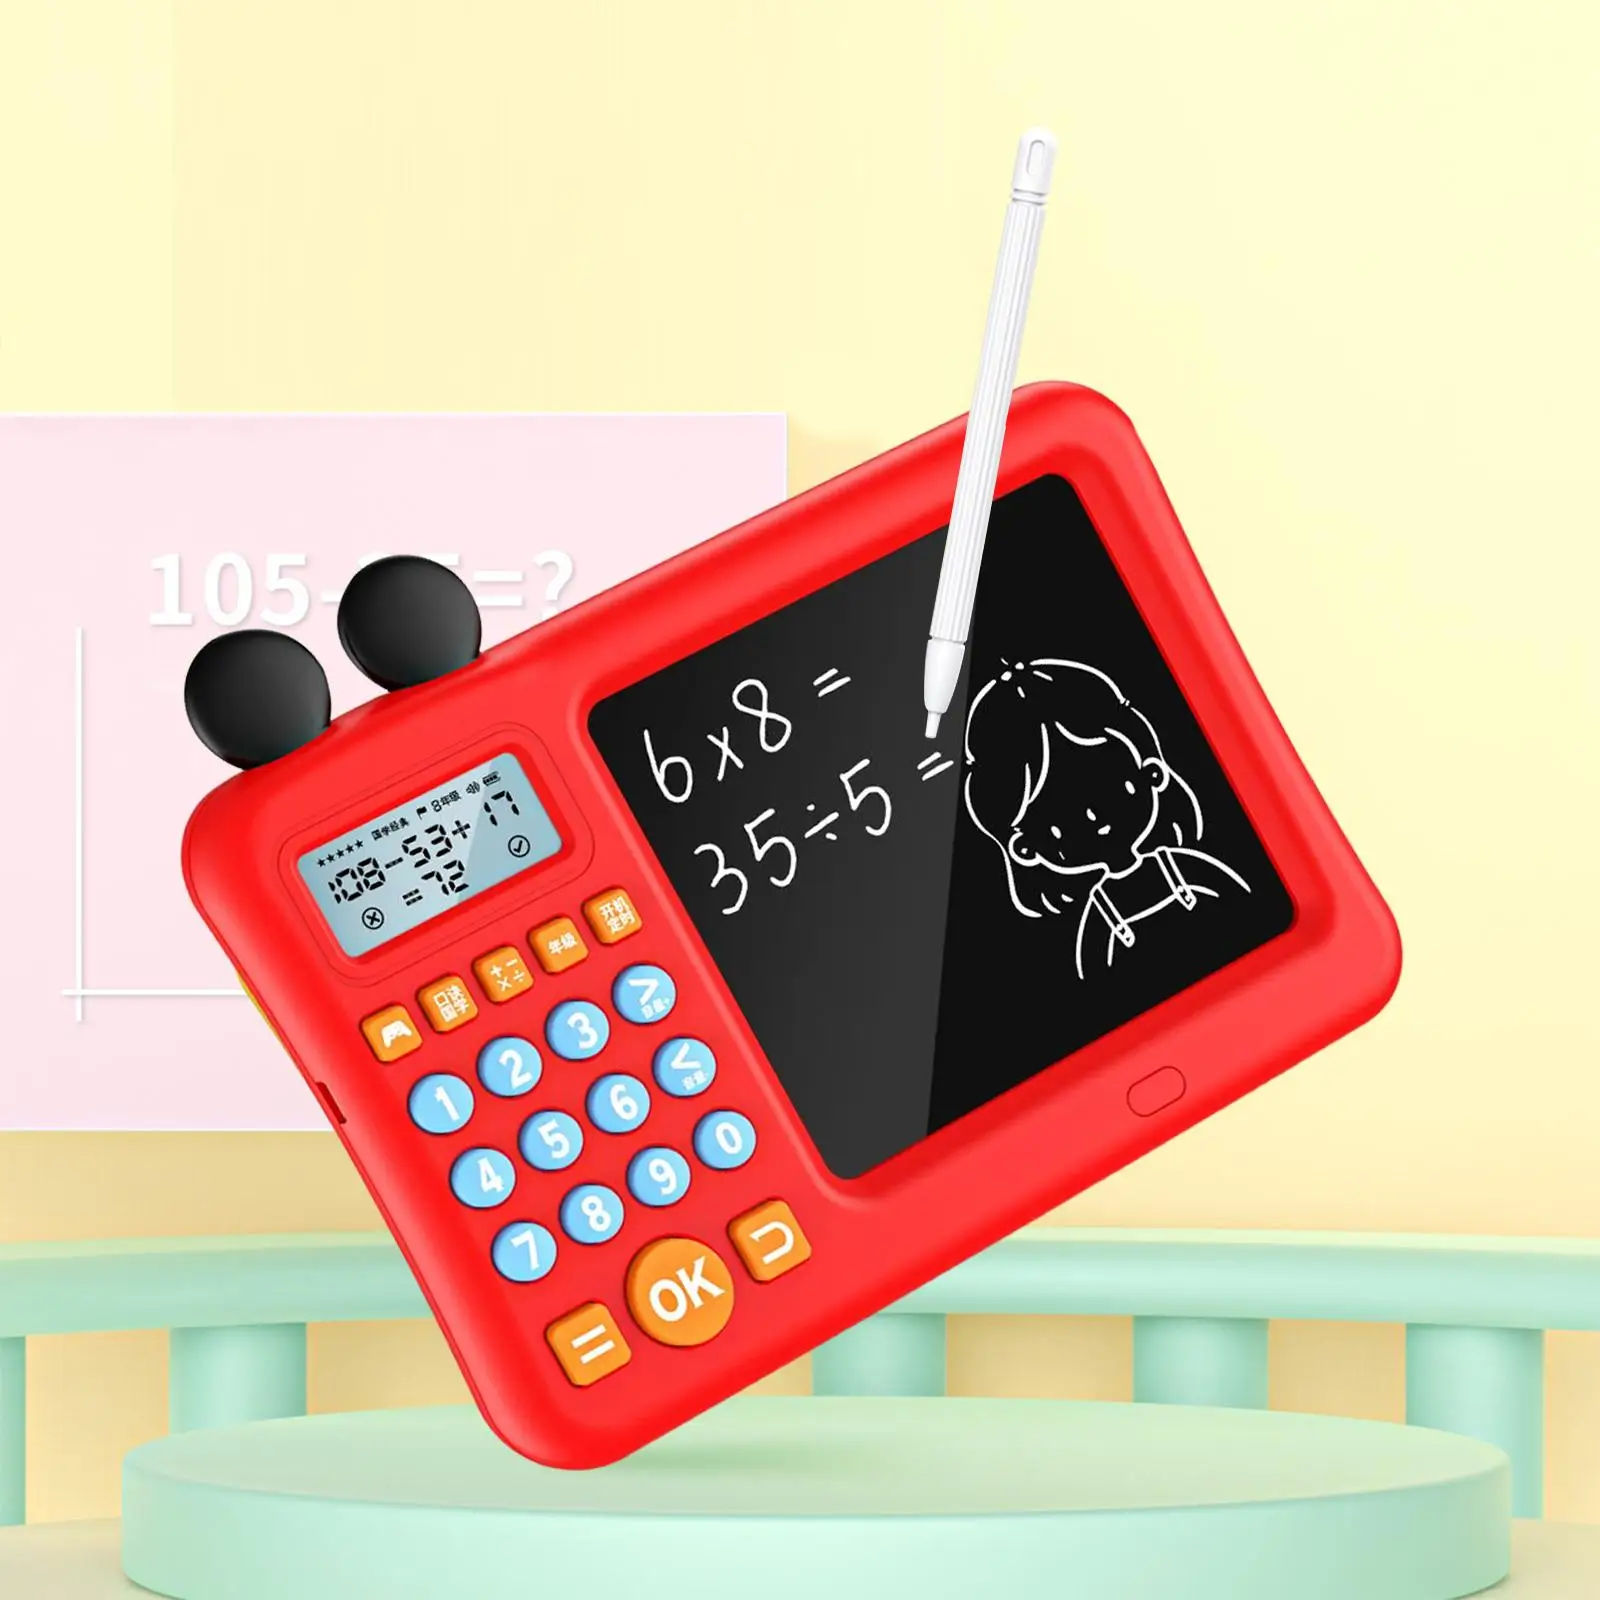 Maths Teaching Calculator Early Math Educational Toy Addition Subtraction